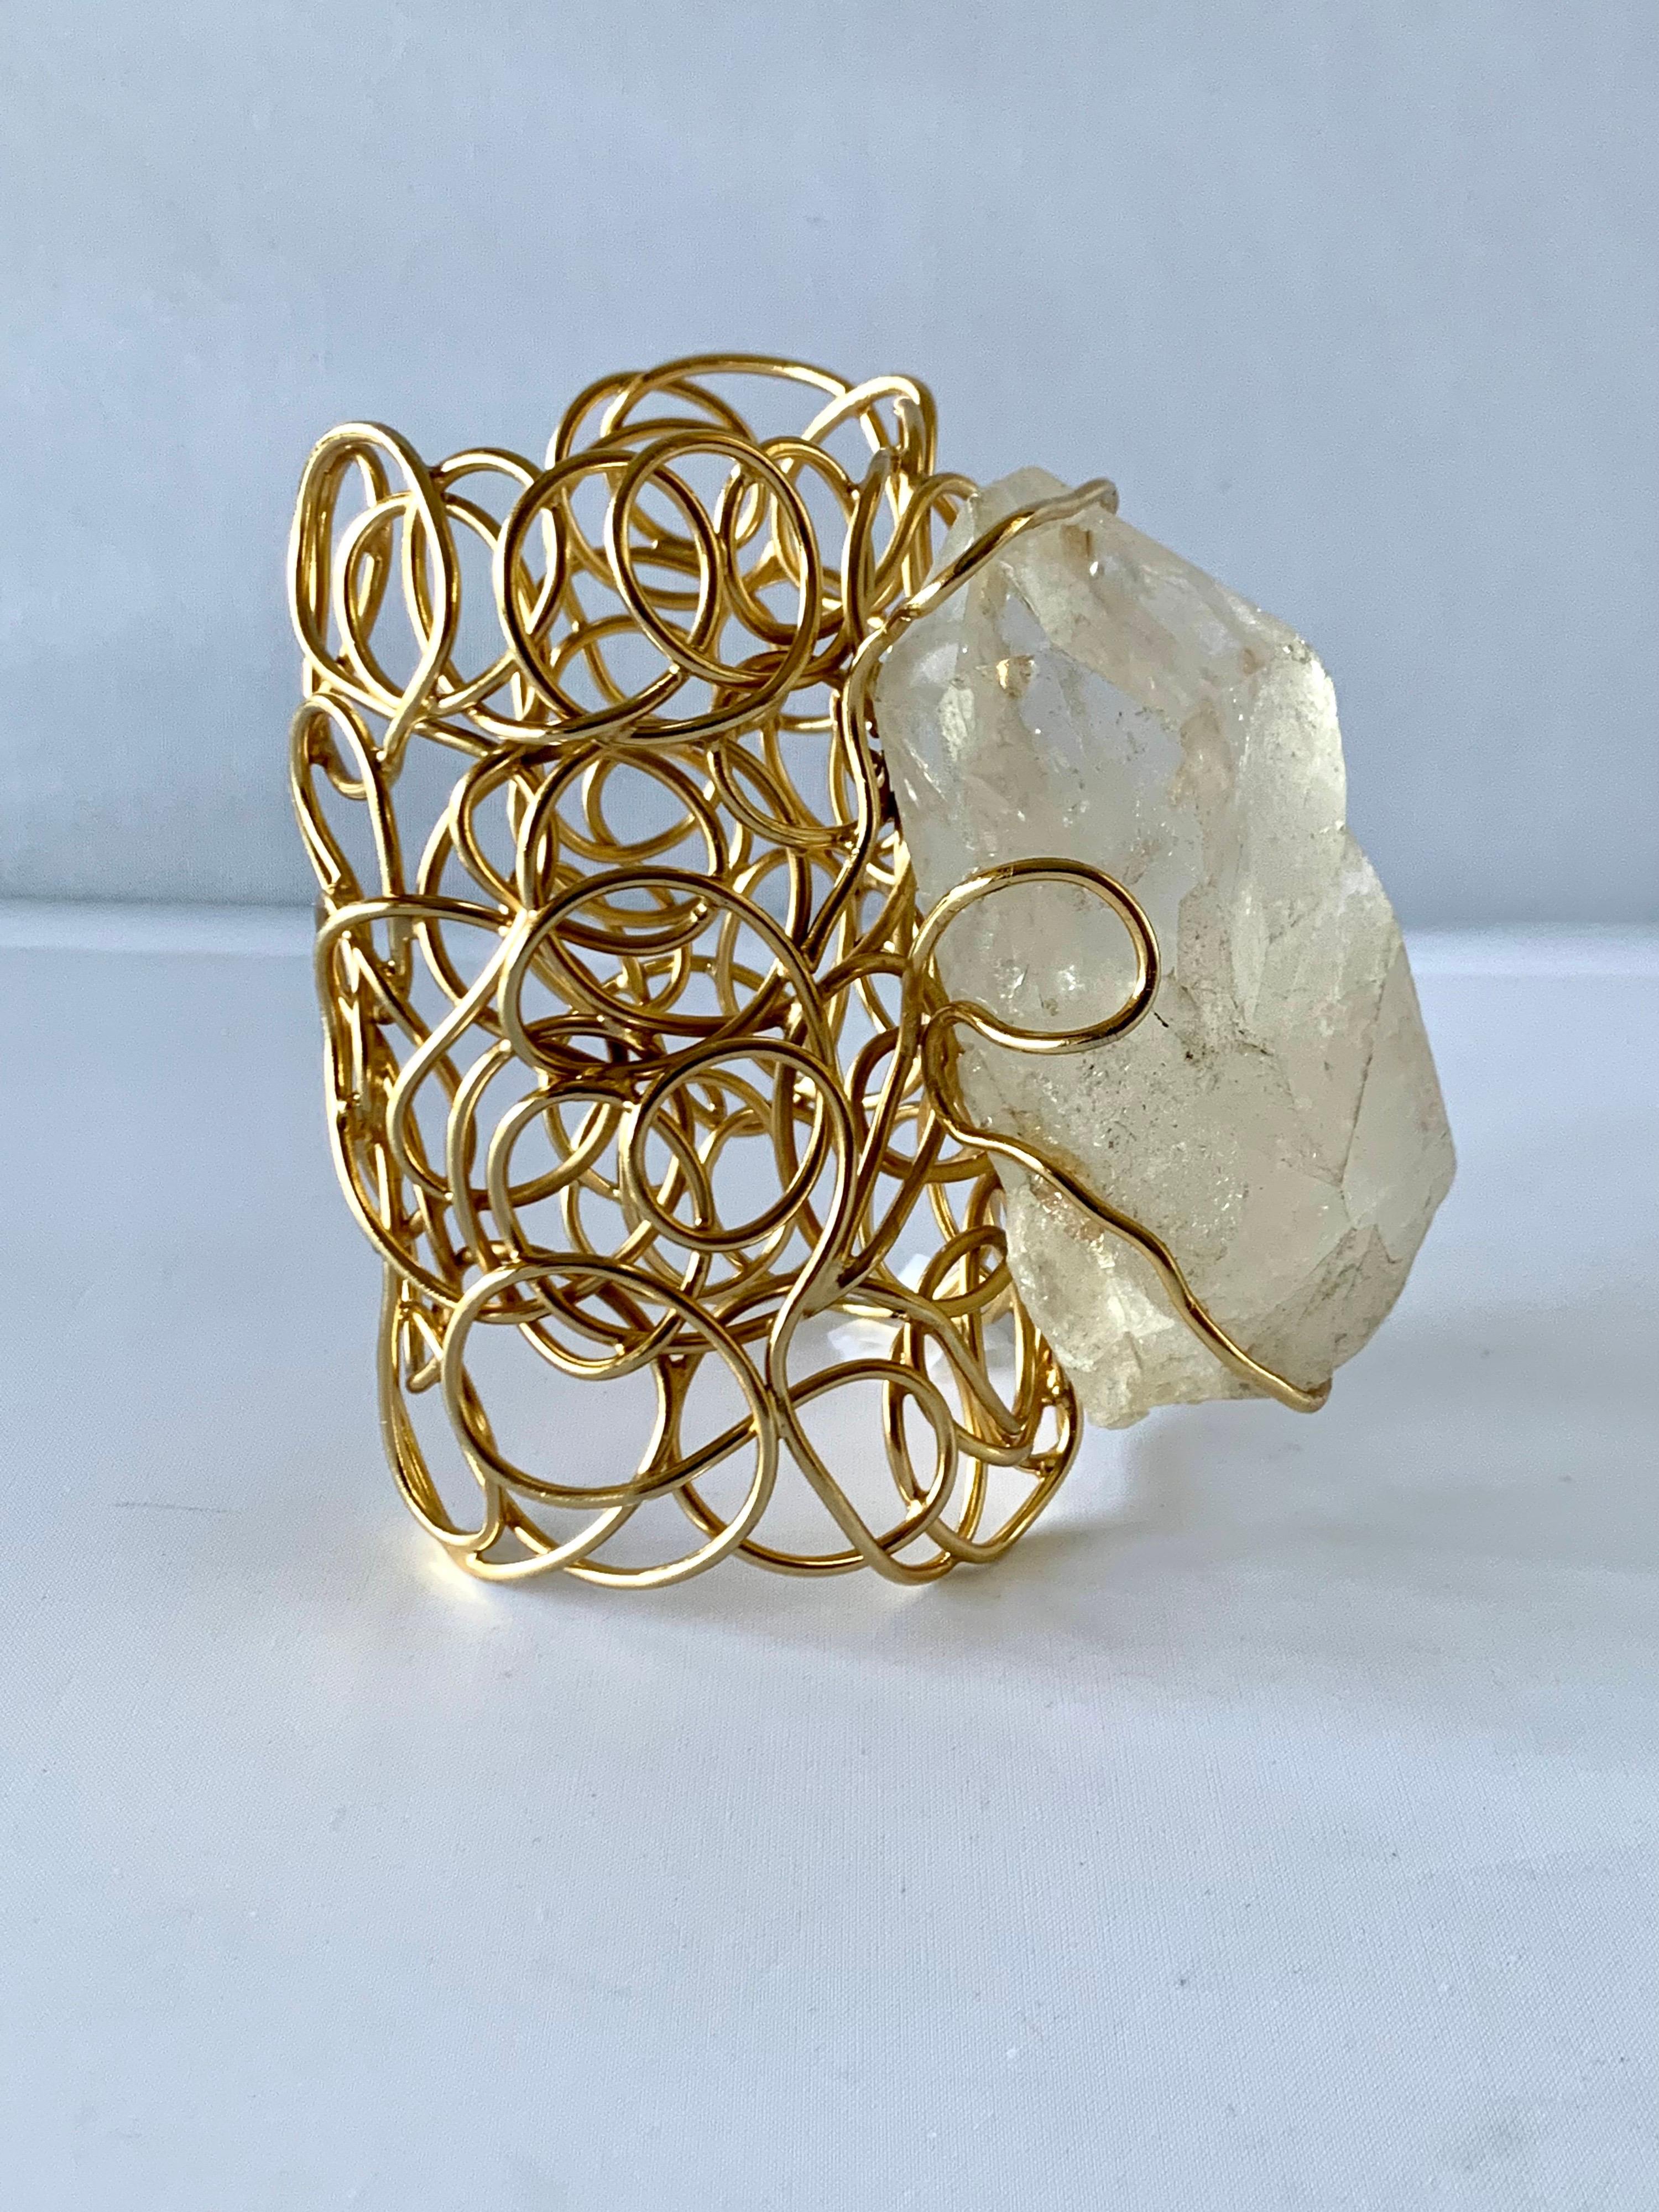 Massive gilt rock crystal cuff bracelet, crafted from hand-manipulated gilded brass featuring an abstract design and embellished by a large piece of faceted rock crystal. Made in Paris France.

The bracelet has the romantic essence of Rober